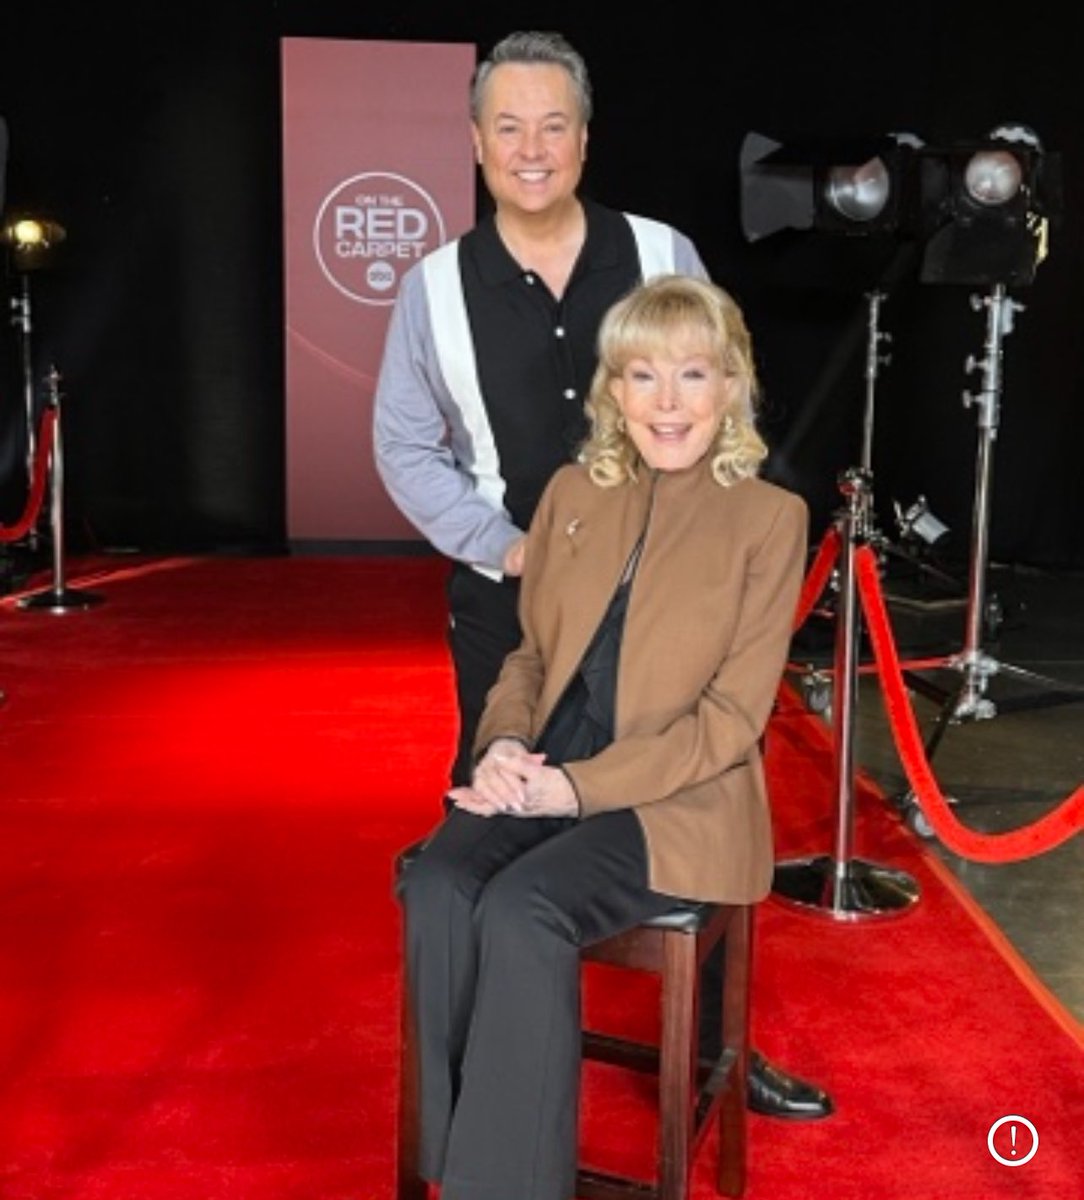 If you are a Barbara Eden fan, our @OnTheRedCarpet Icons special airs in L.A. tonight at 6:30 on @ABC7. I think you’ll enjoy watch it. If you’re elsewhere, you’ll be able to tune in online by going to ontheredcarpet.com THANKS!